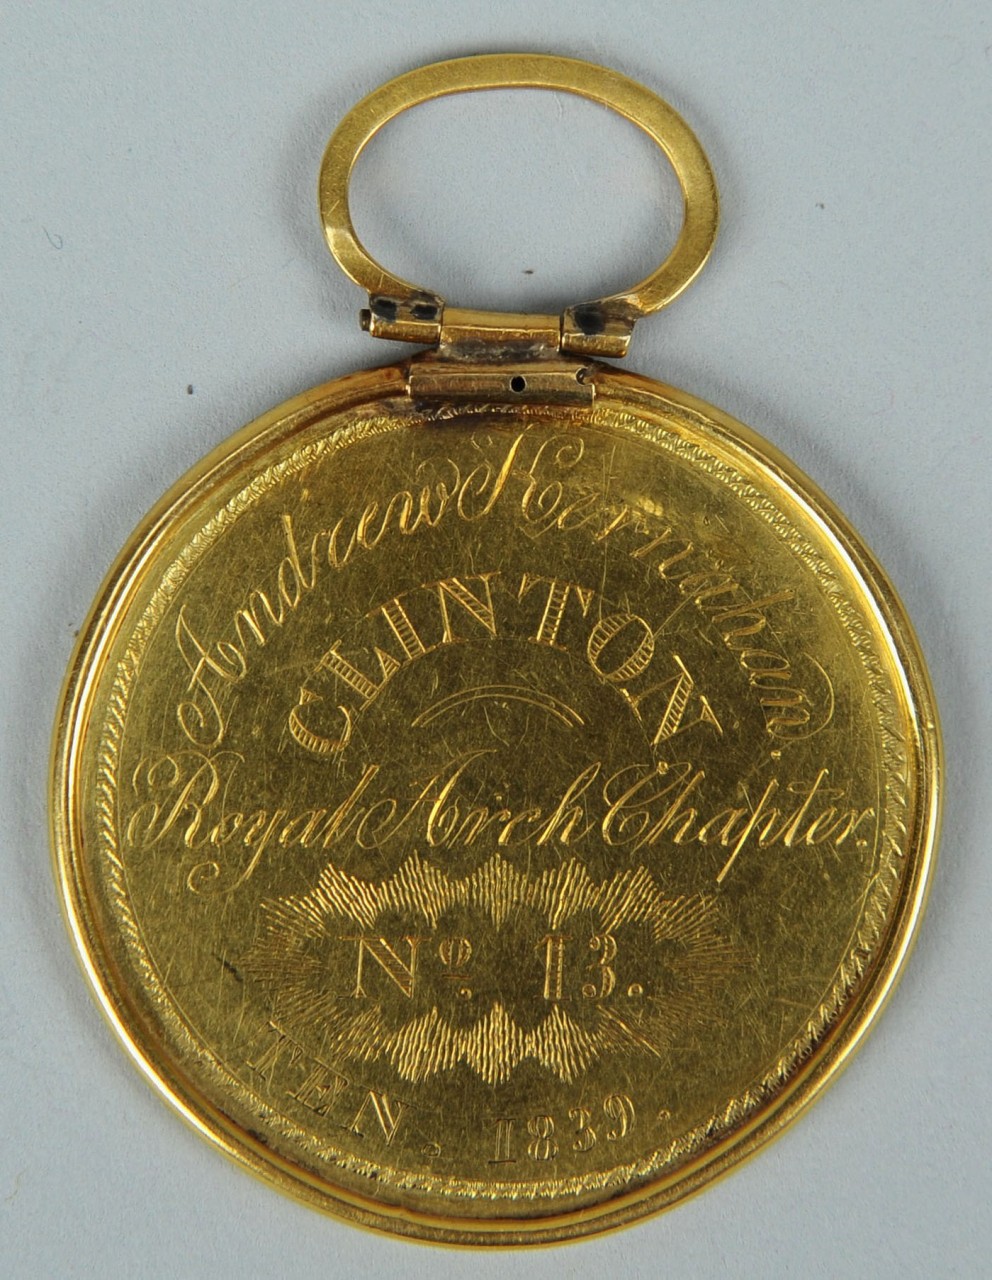 Lot 161: 1839 East Tennessee  Gold Masonic Medal